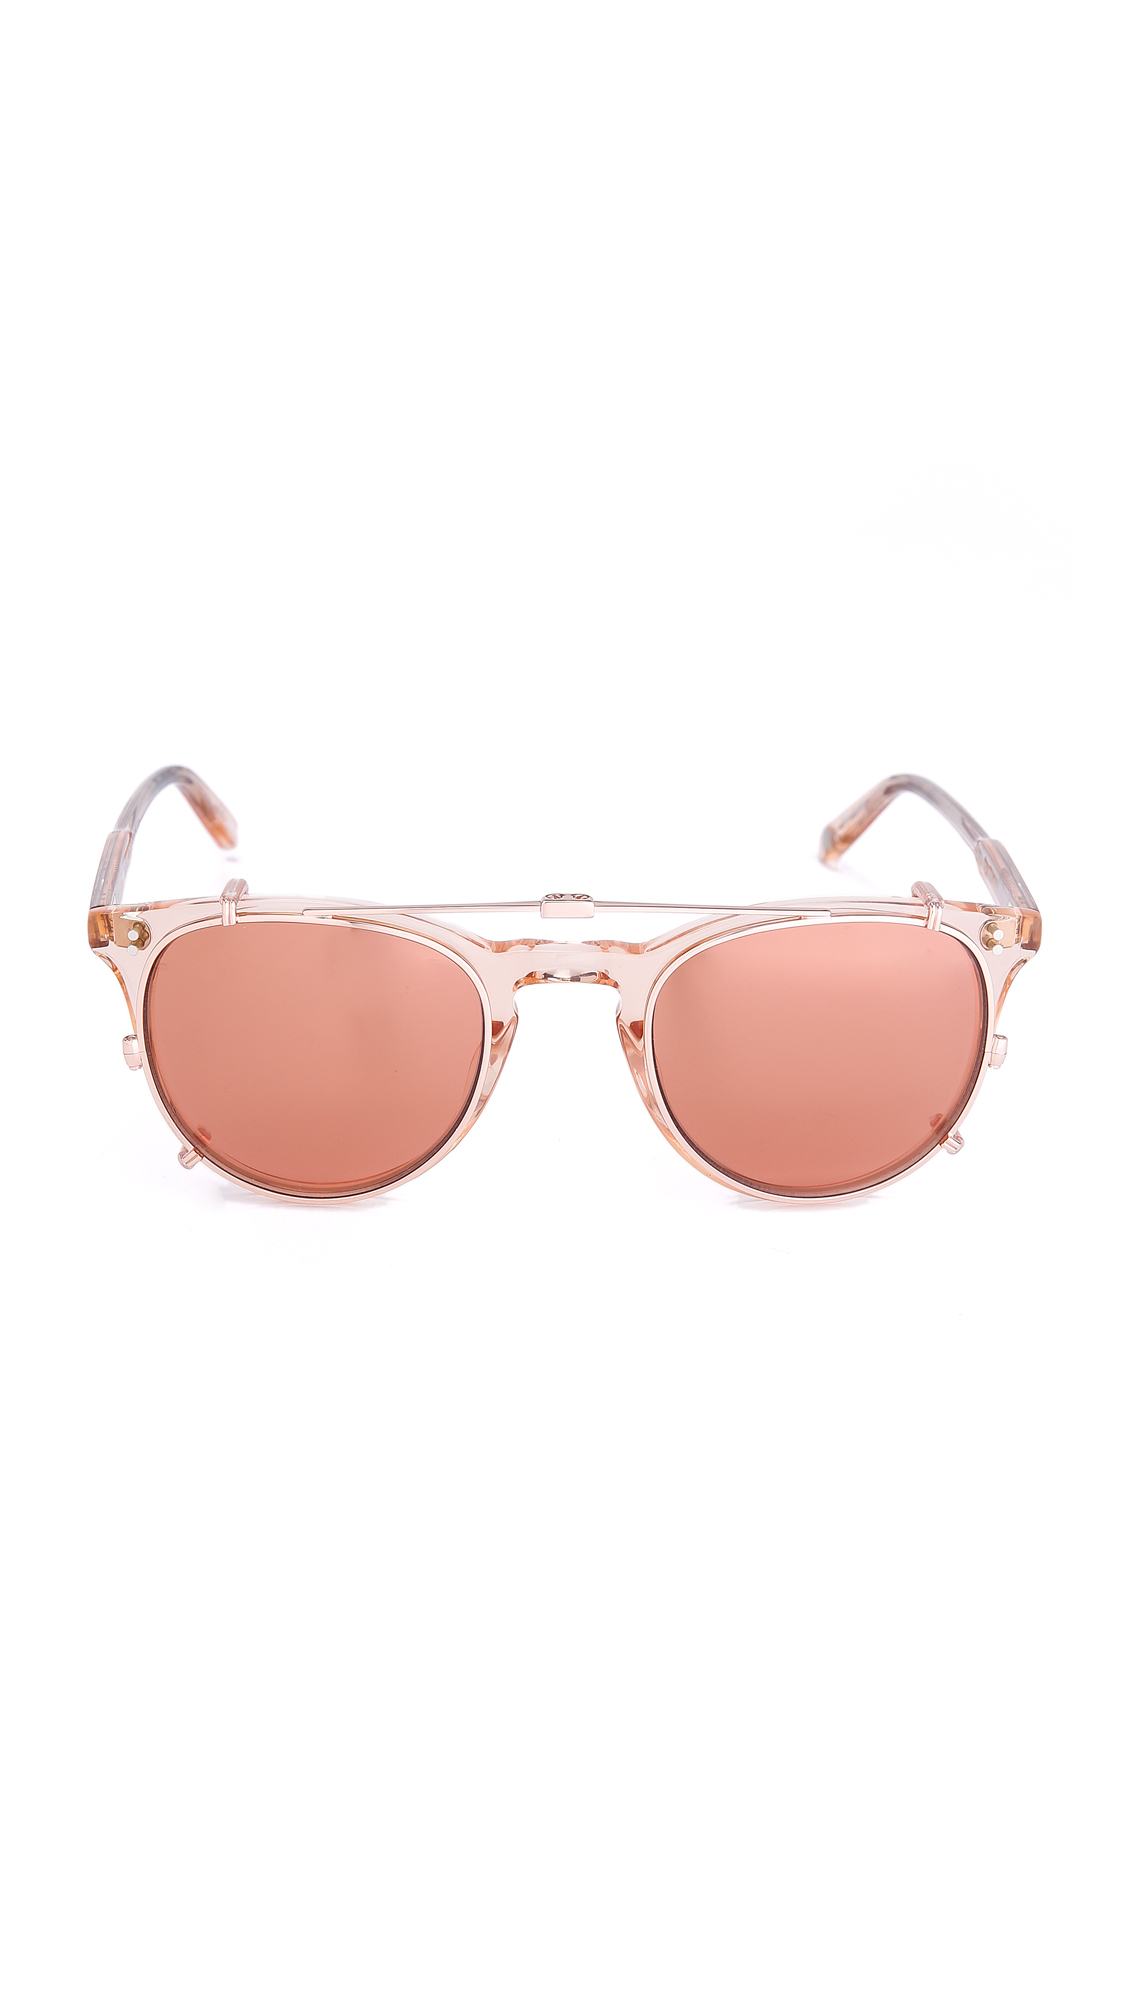 rose colored glasses clipart - photo #6